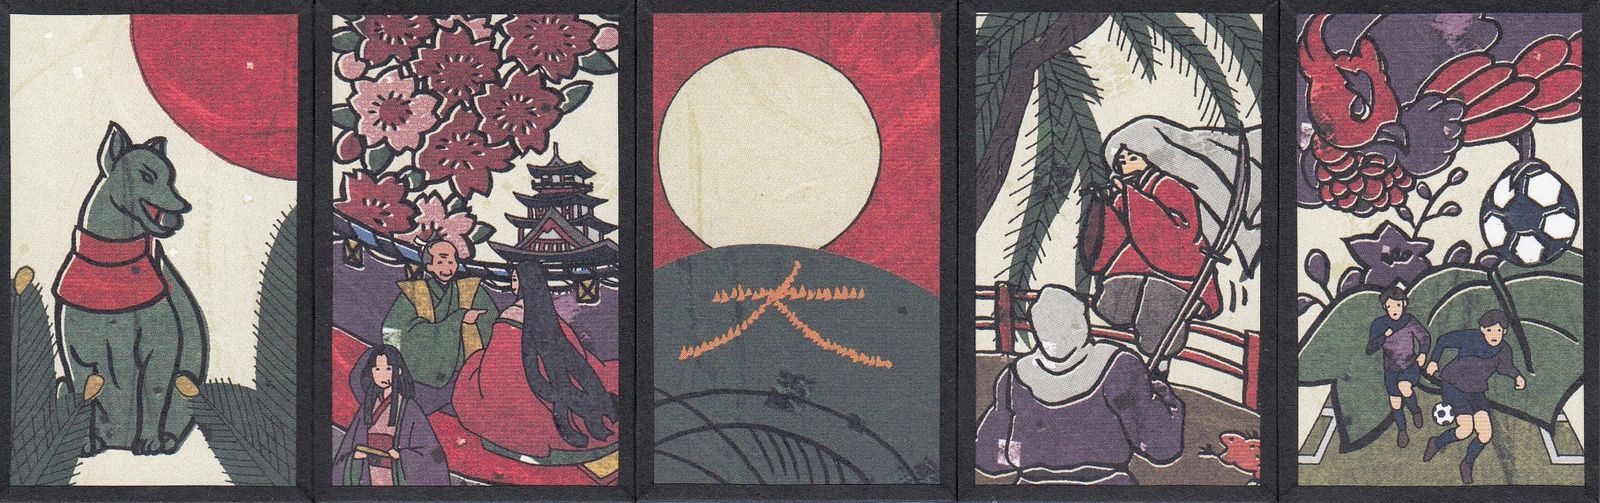 Five hanafuda cards with depictions of landmarks and various aspects of Kyōto life.